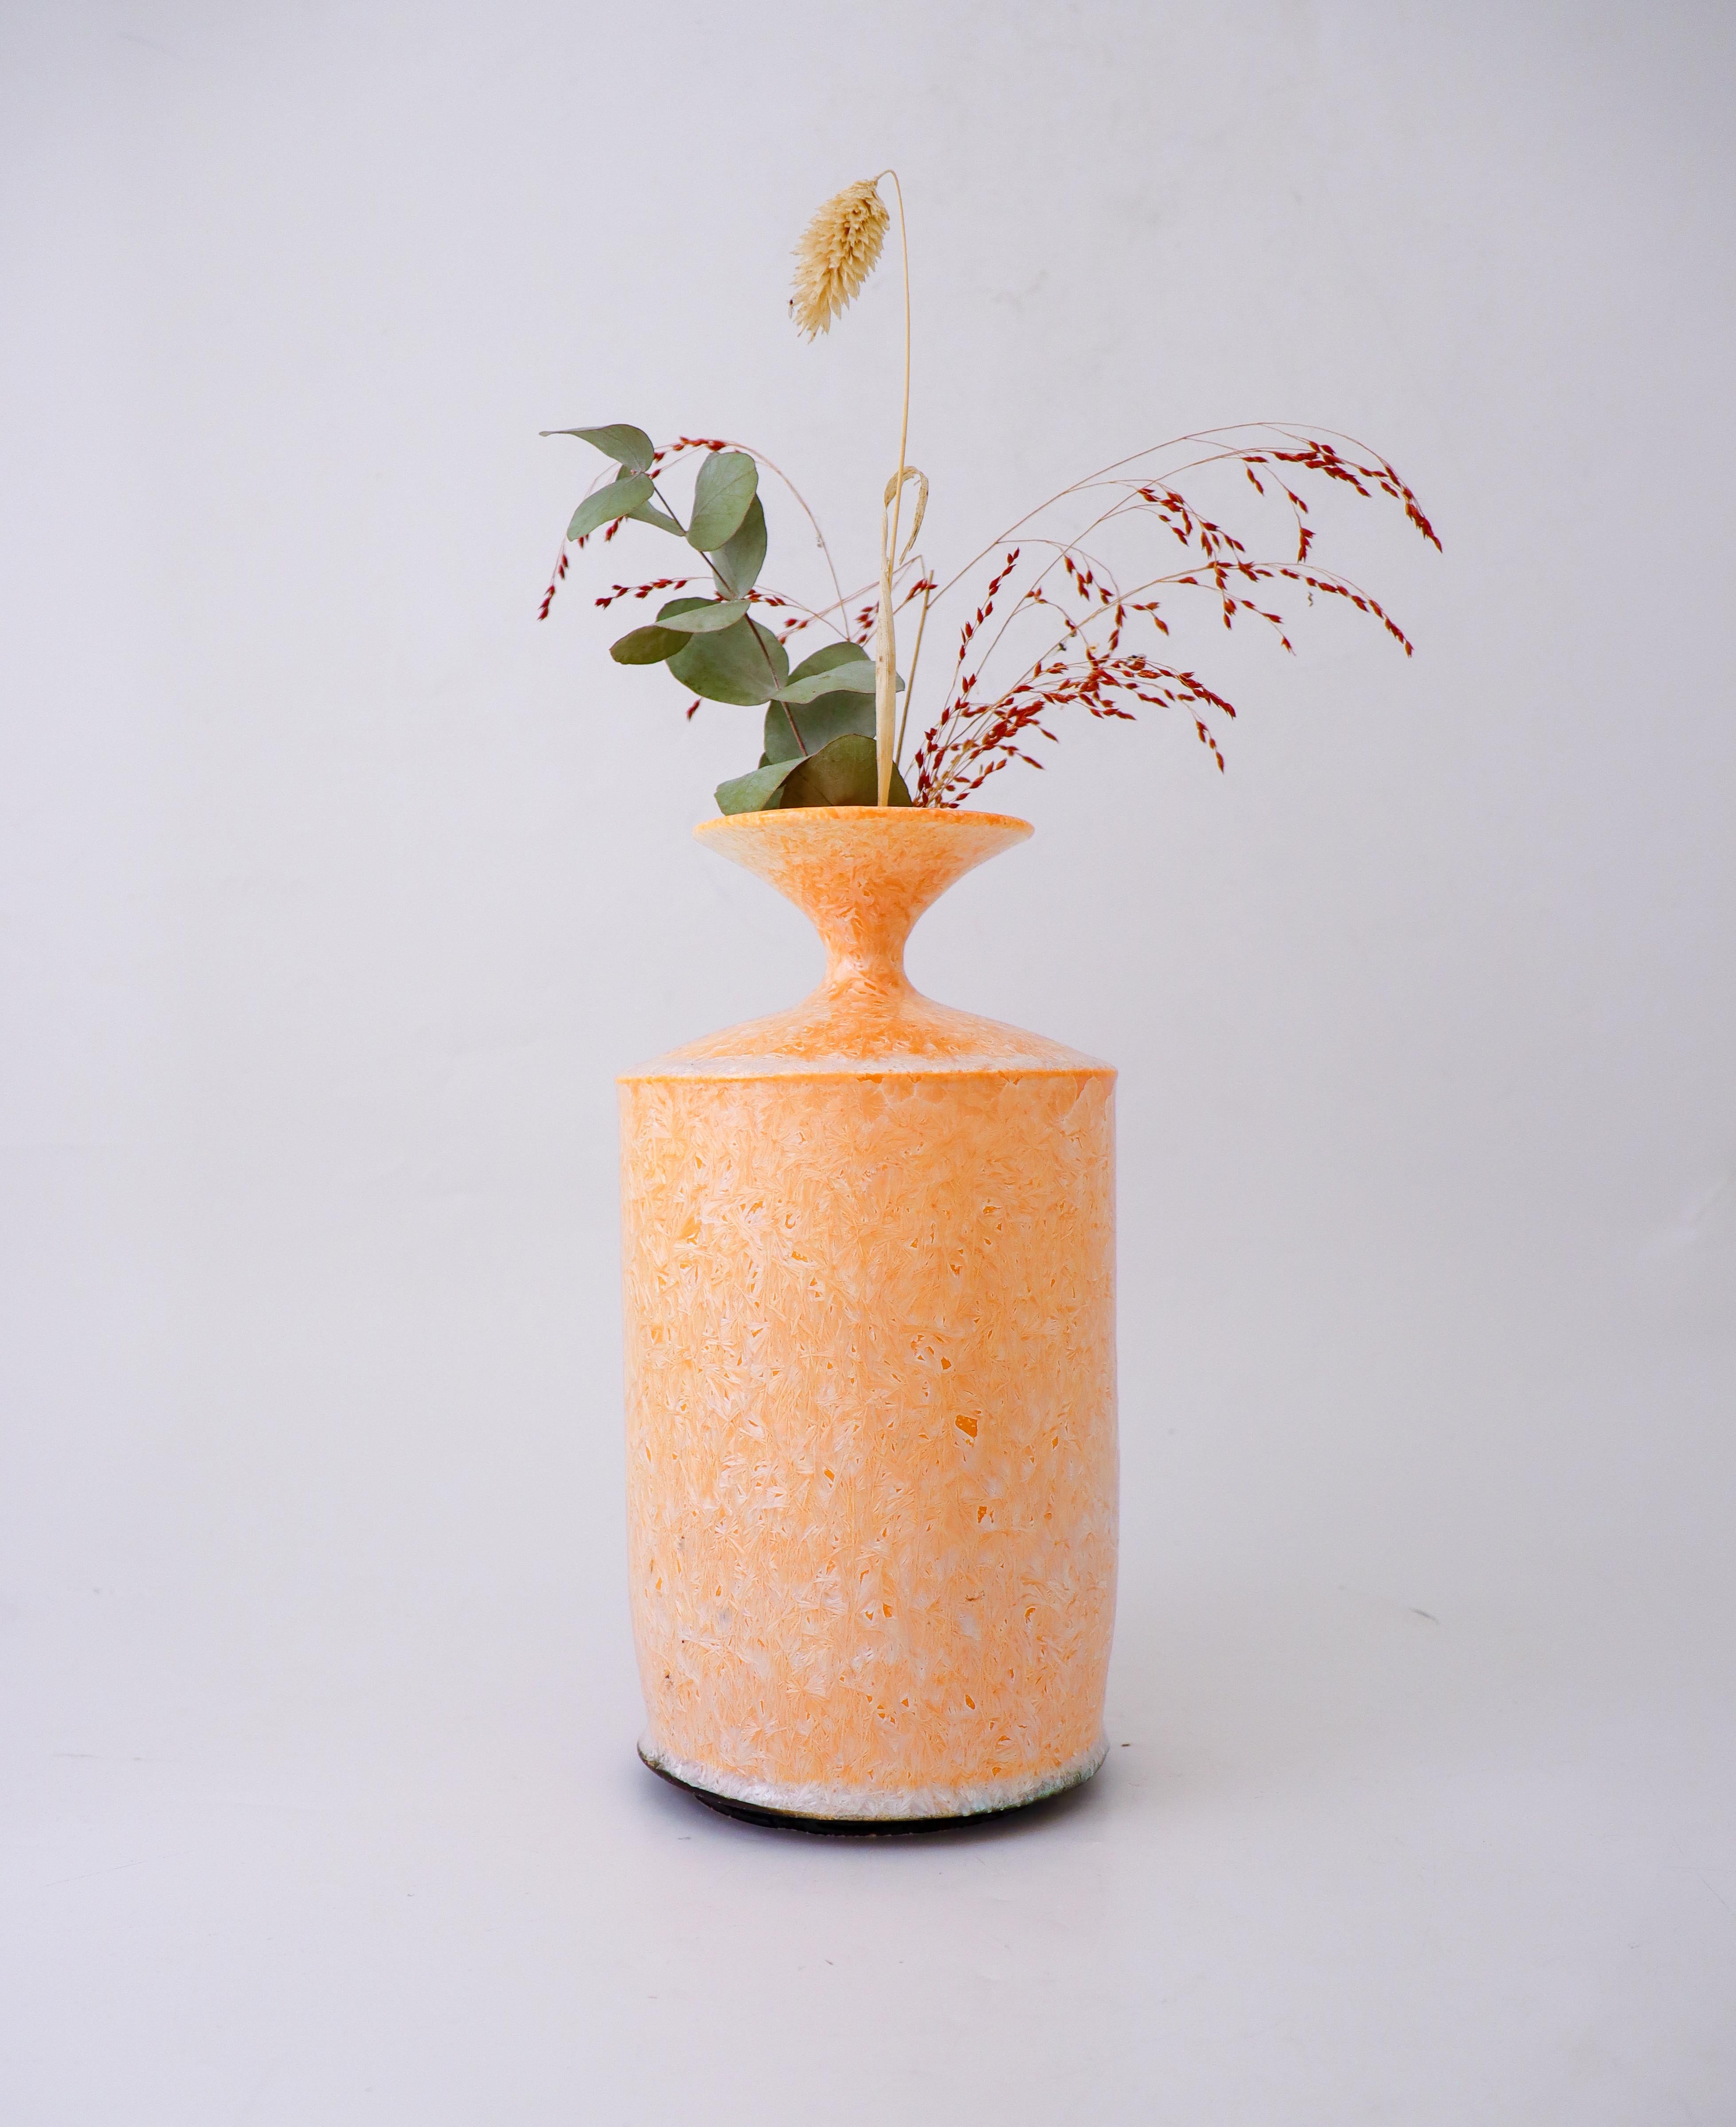 This beautiful contemporary ceramic vase by Isak Isaksson features a stunning abstract design in shades of apricot. The vase stands at 25 cm tall and is handmade with a glossy finish. The artist's signature is incised on the backstamp, confirming